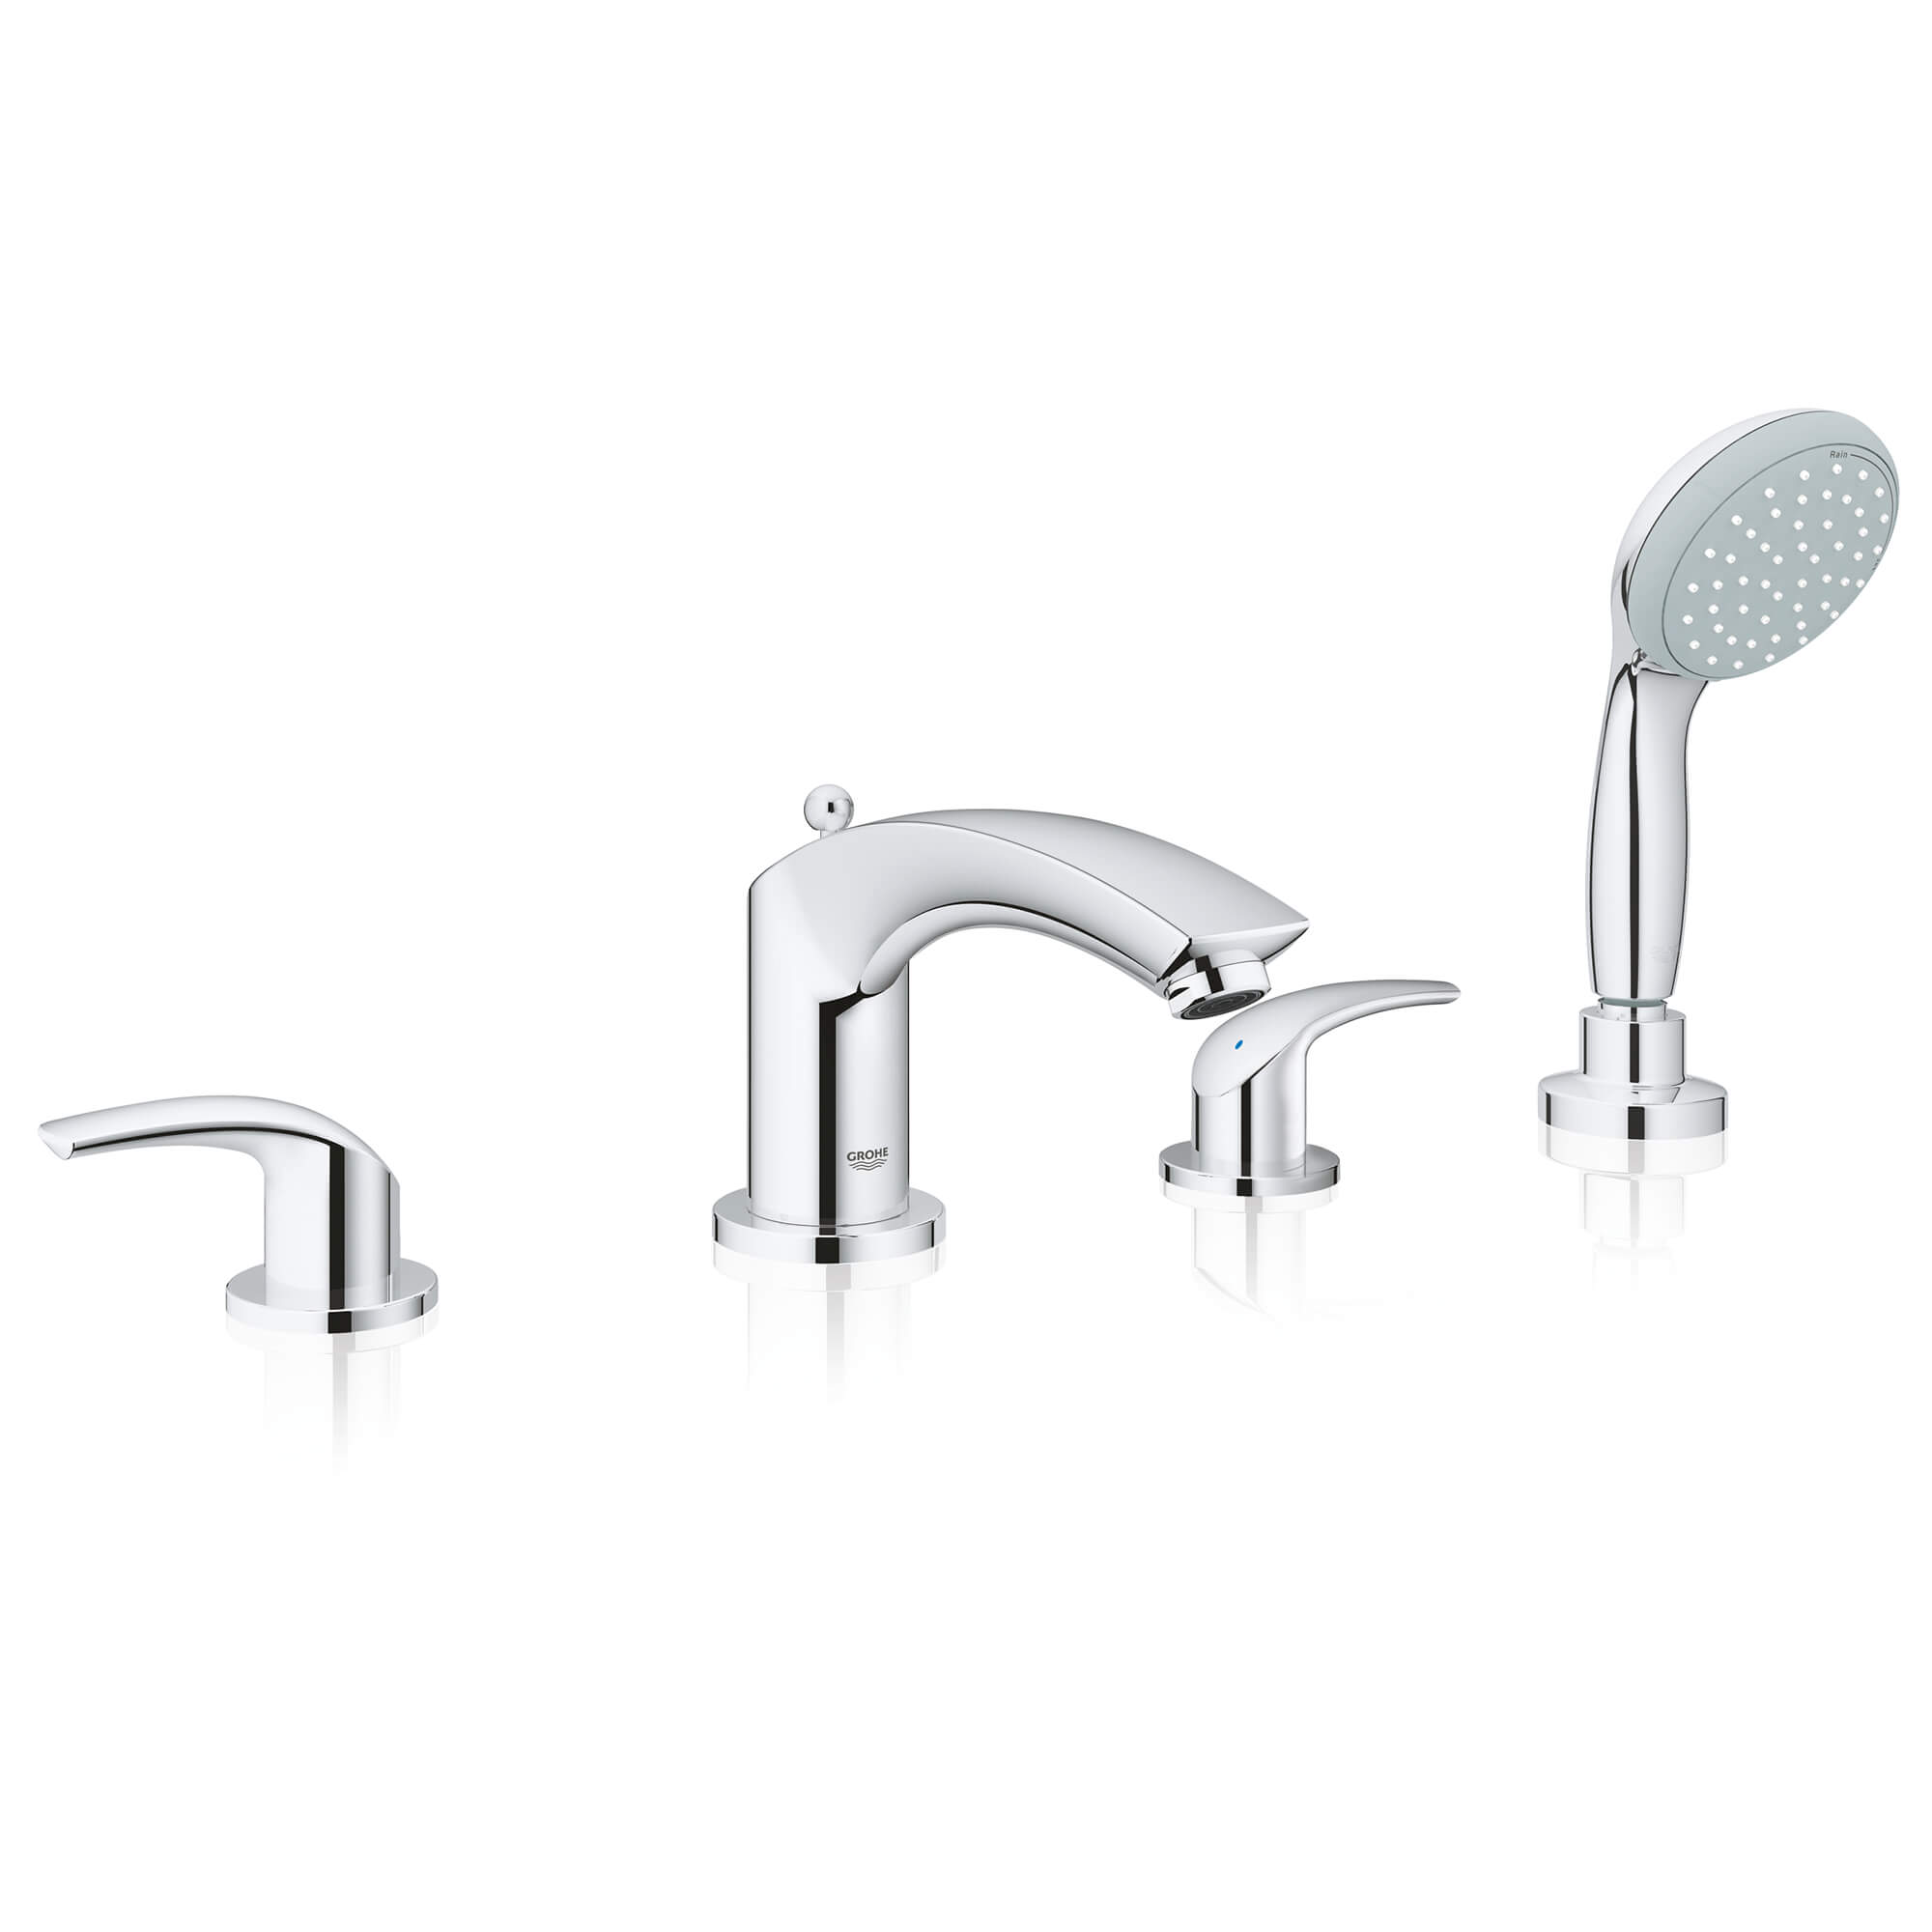 4-Hole 2-Handle Deck Mount Roman Tub Faucet with 6.6 L/min (1.75 gpm) Hand Shower